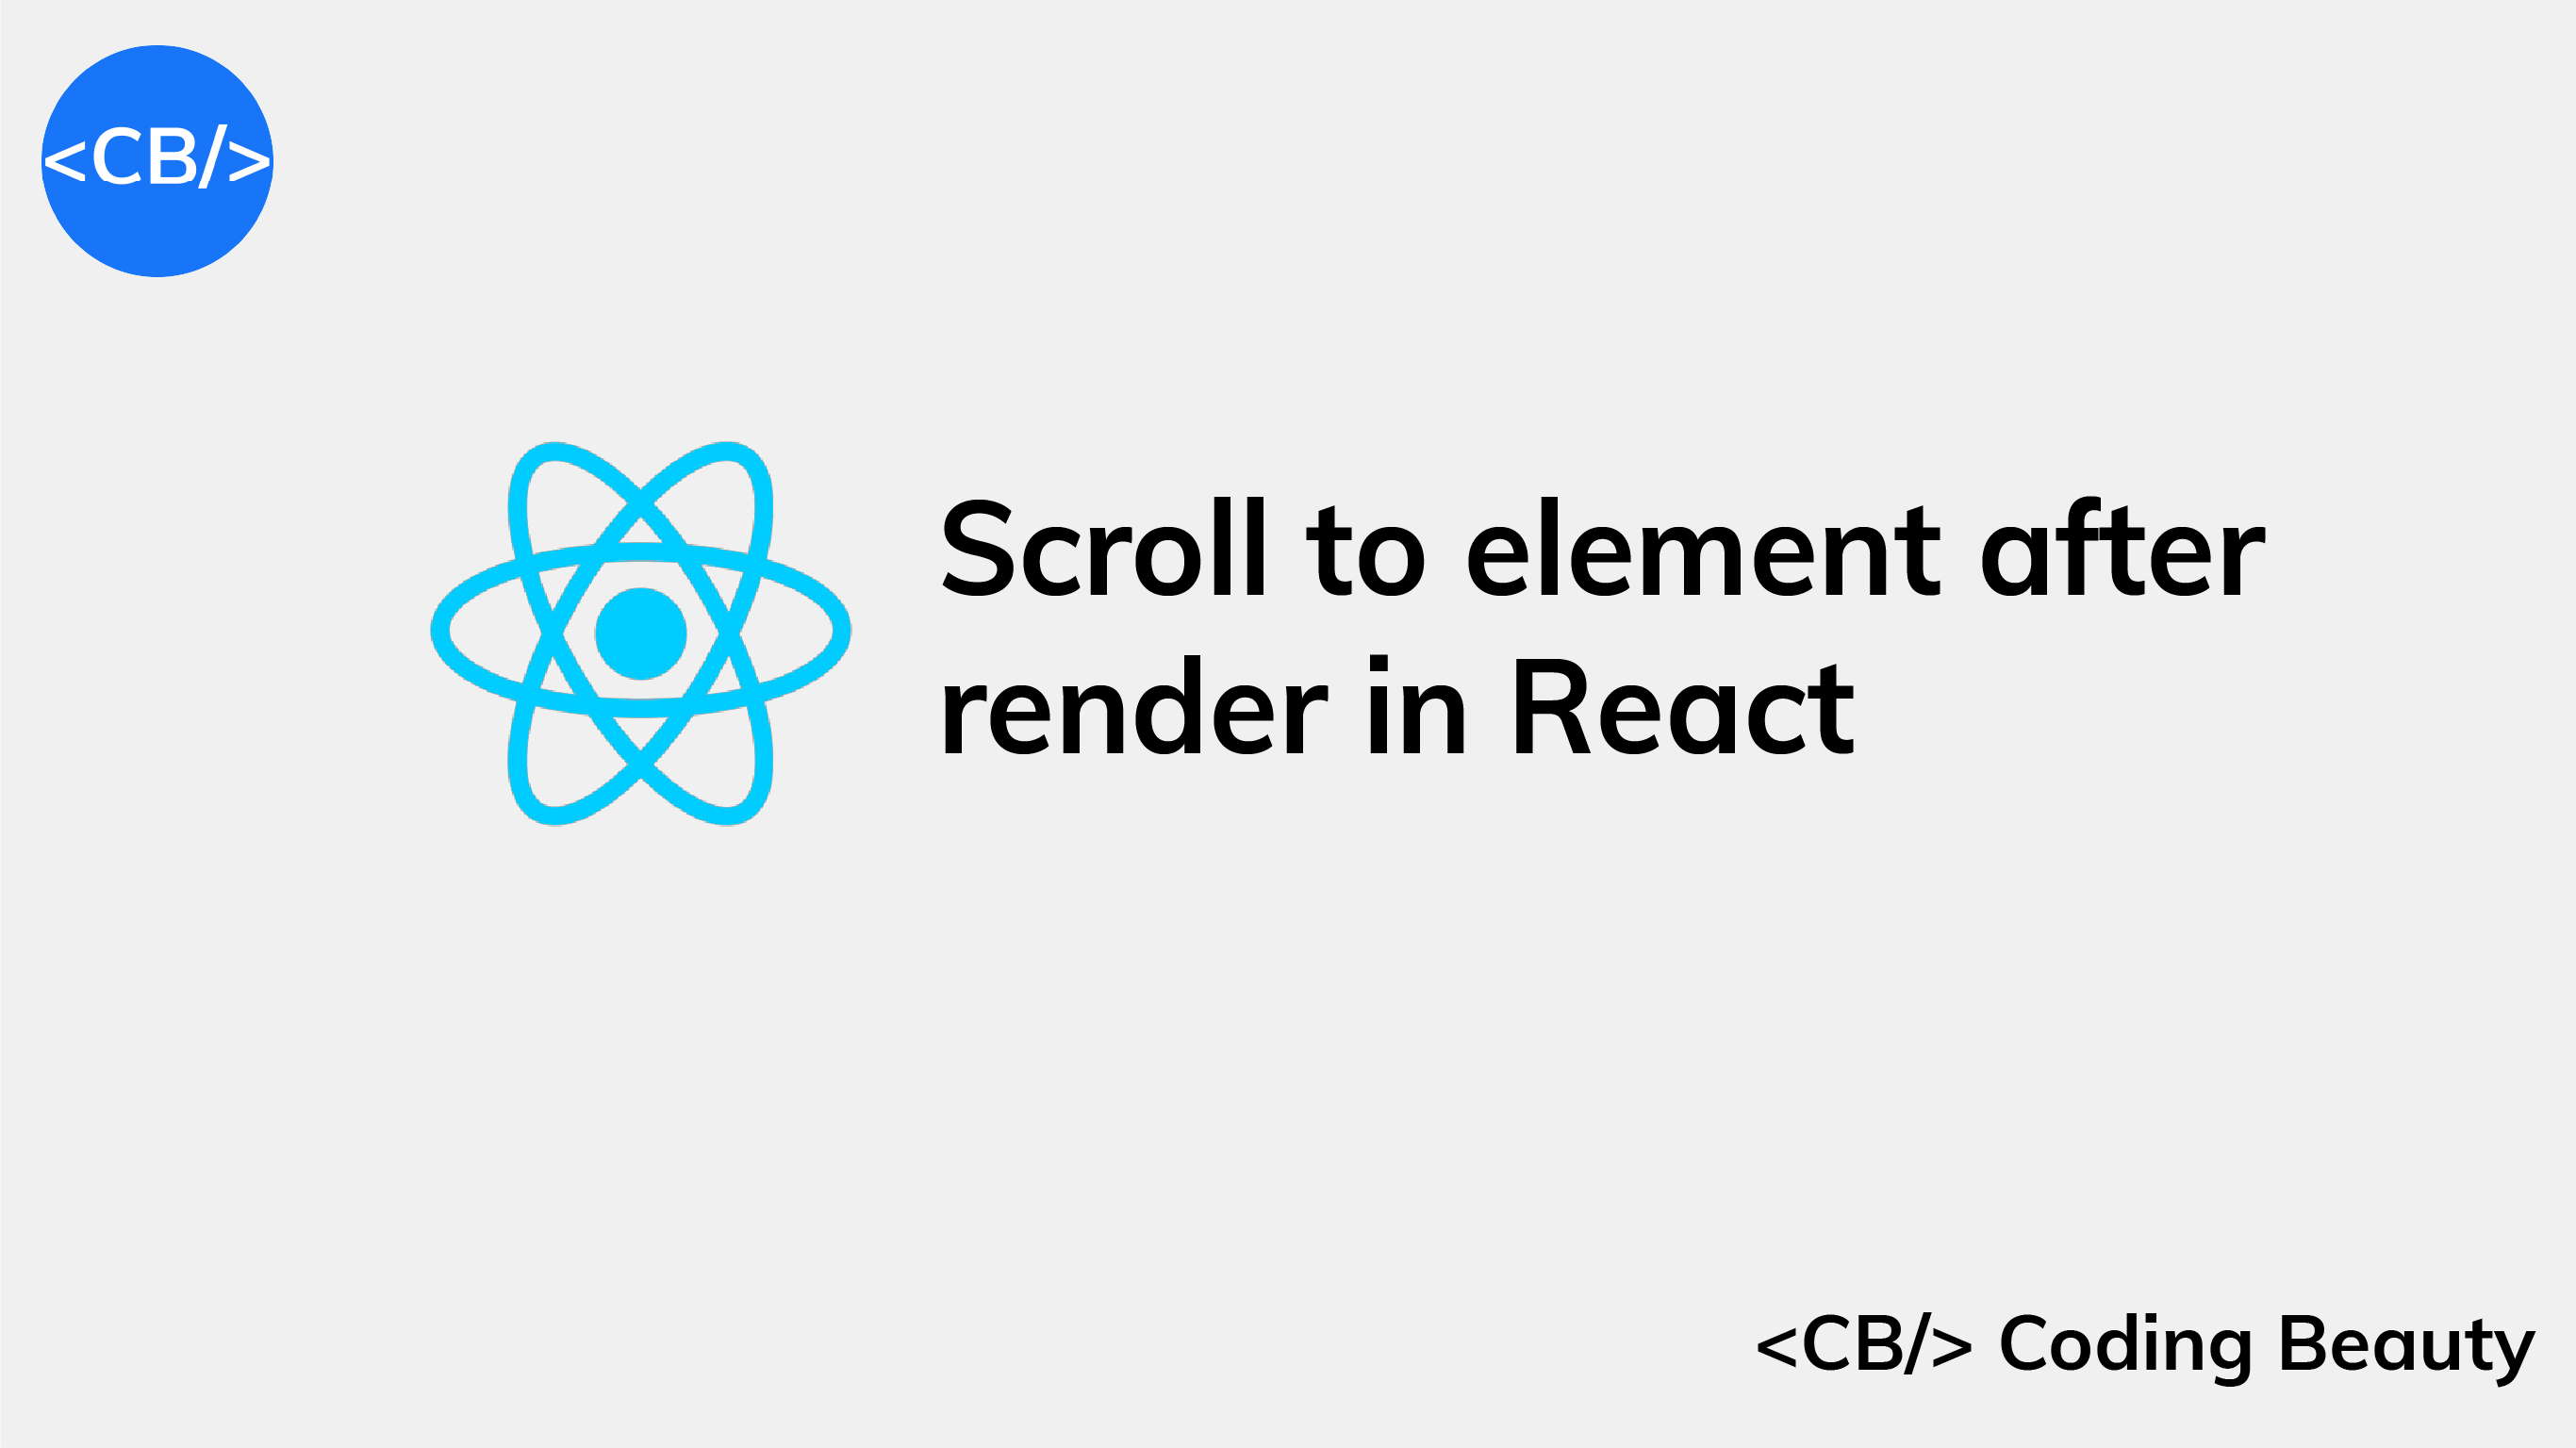 How to Scroll to an Element After Render in React